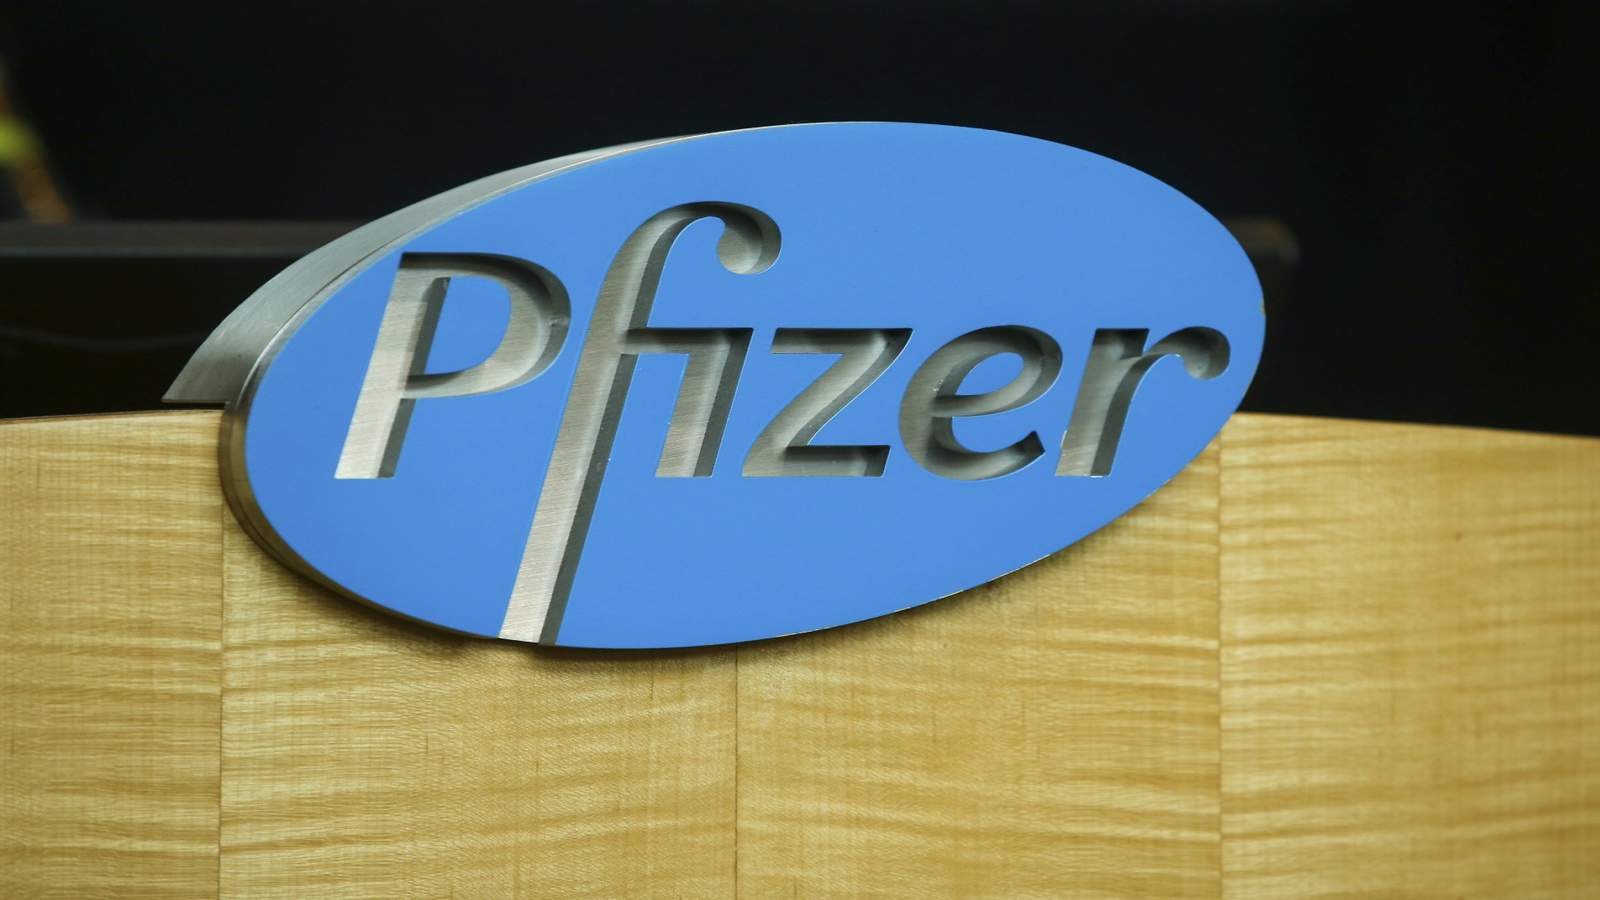 WATCH: US panel endorses widespread use of Pfizer COVID-19 vaccine